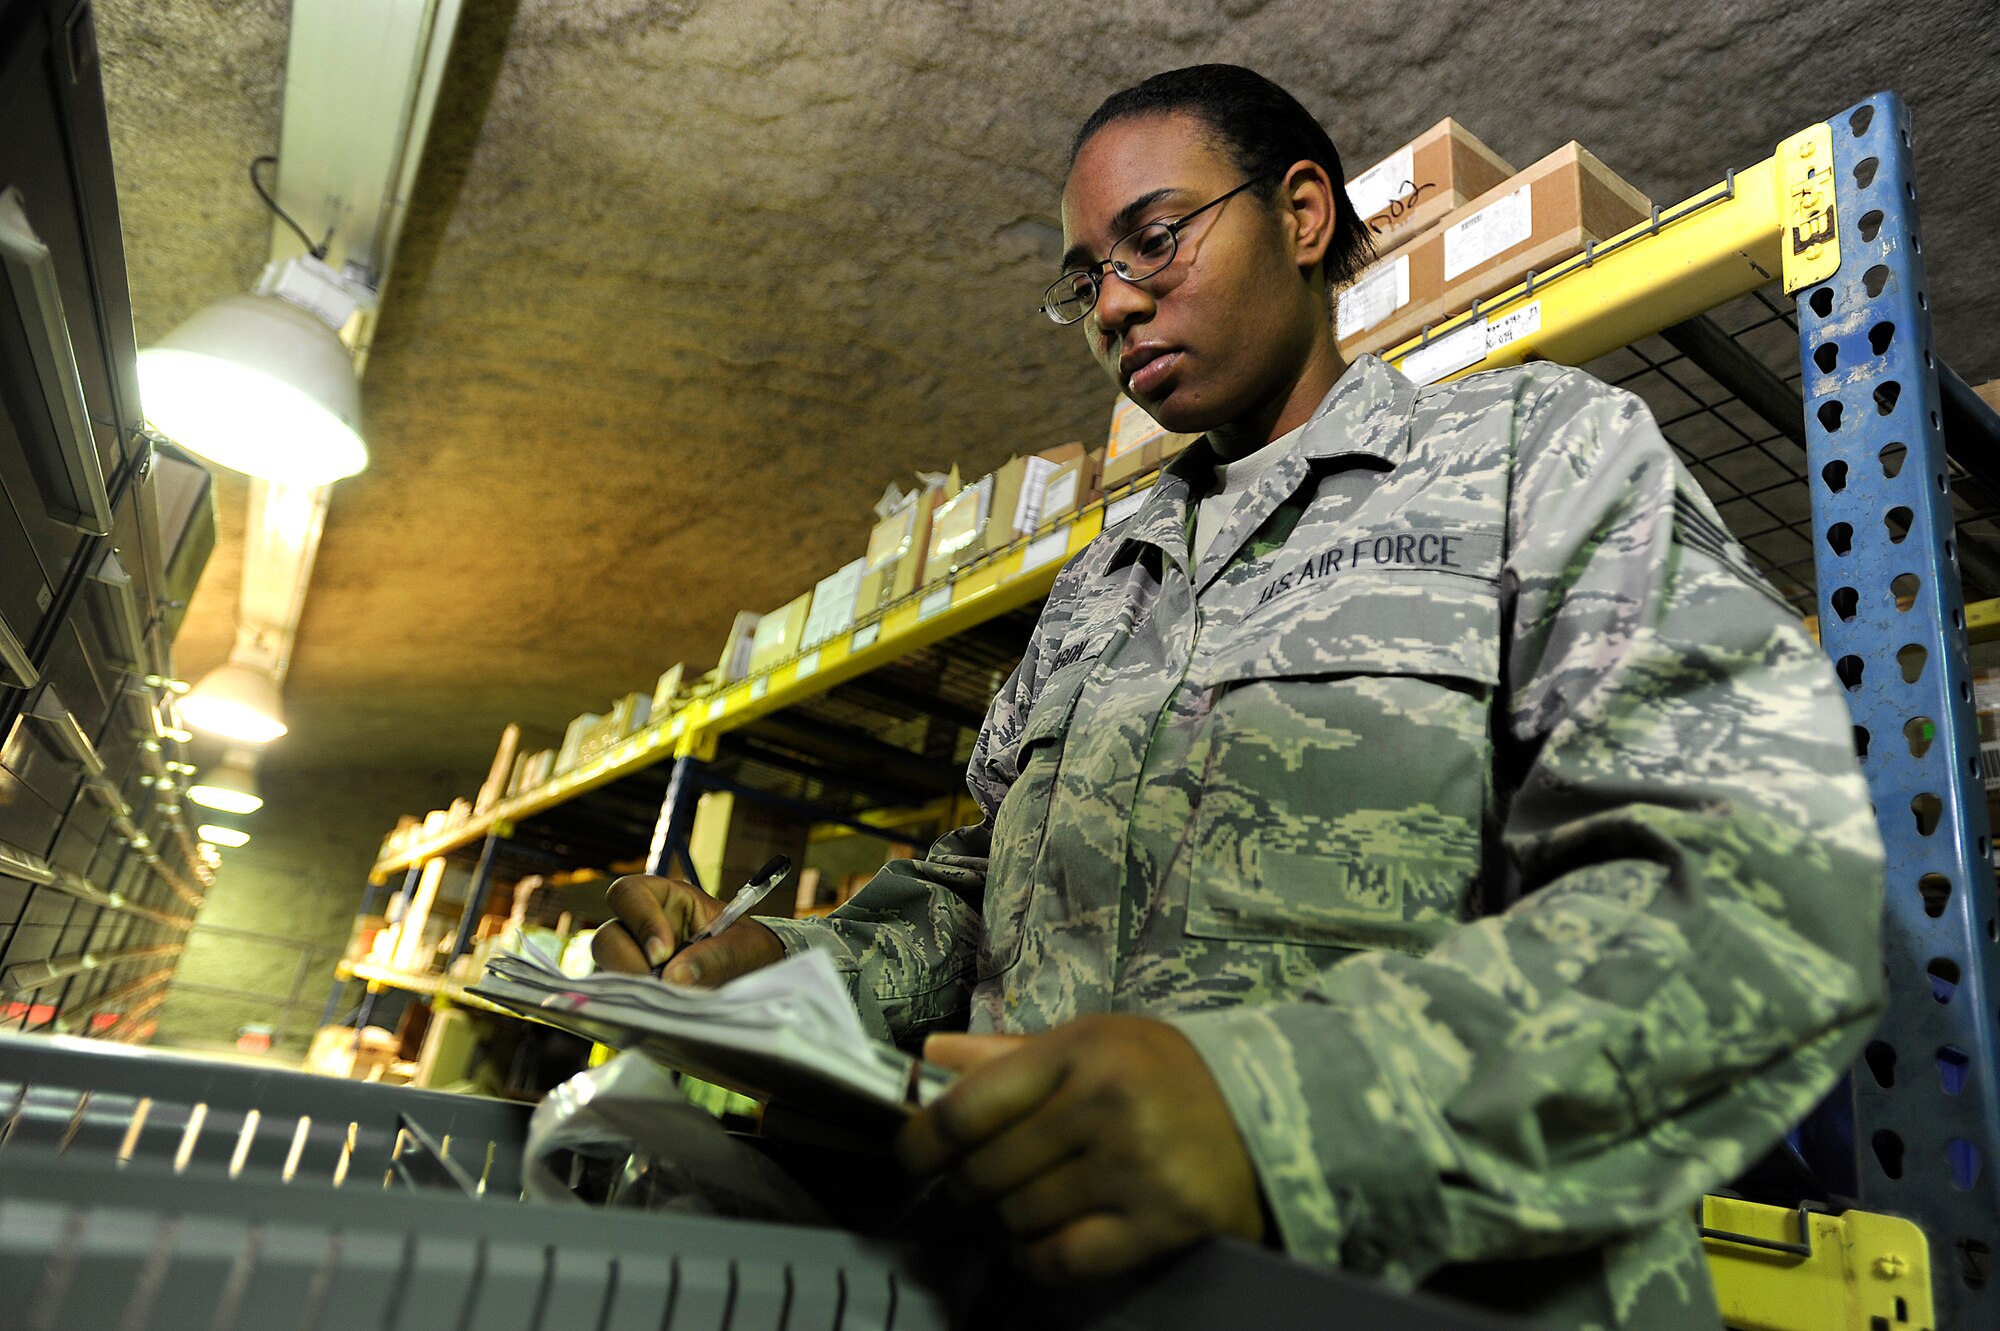 Staff Sgt. Akeilee Murchison performs a warehouse validation Oct. 10 at Joint Base Balad, Iraq. She recently helped put out a fire in the Aircraft Supply Store here, saving millions of dollars in Air Force assets. Murchison, a supply technician assigned to the 332nd Expeditionary Logistics Readiness Squadron, is deployed from Westover Air Reserve Base, Mass., and her hometown is Springfield, Mass. (U.S. Air Force photo/Airman 1st Class Jason Epley)